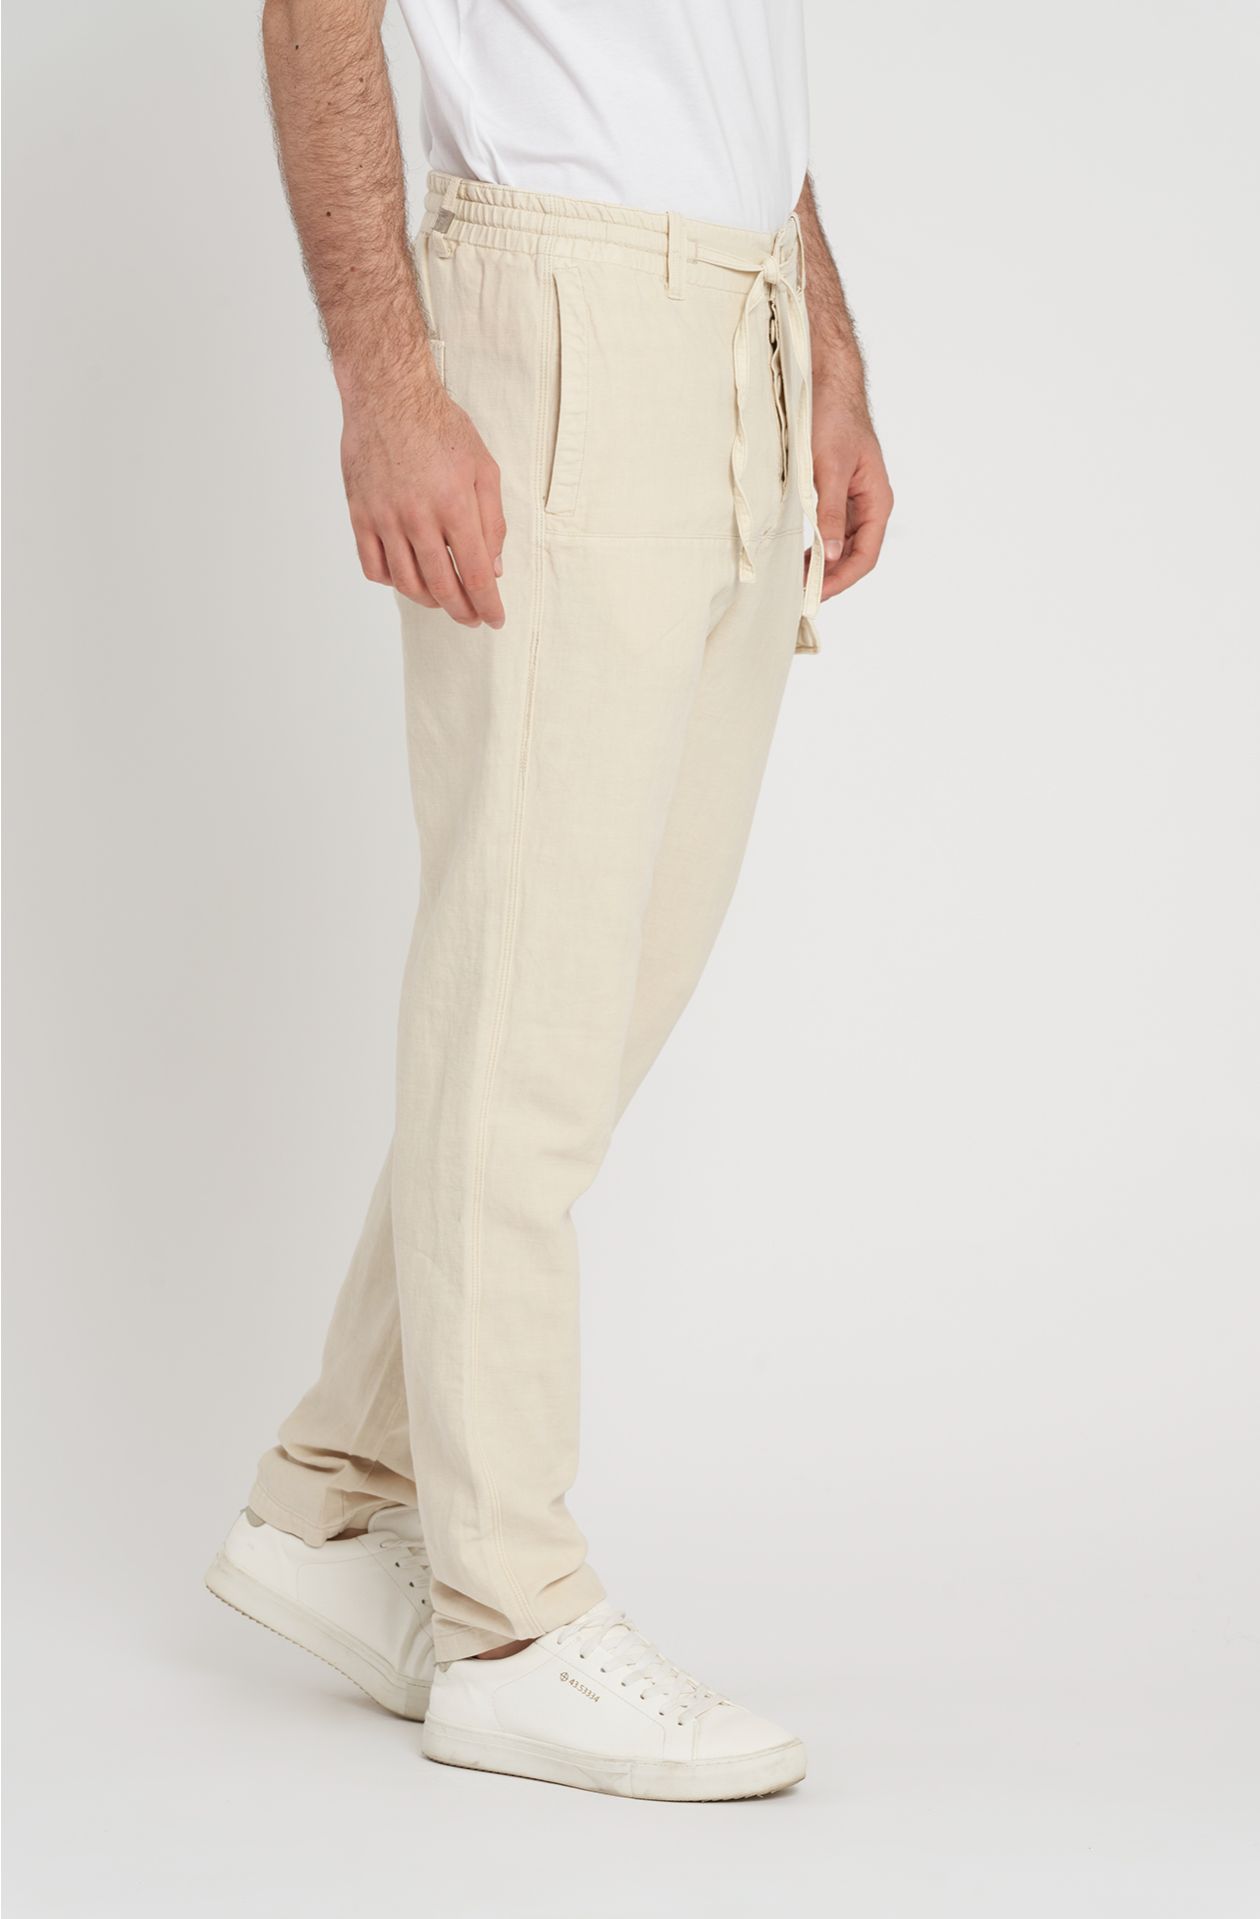 Raw cotton trousers